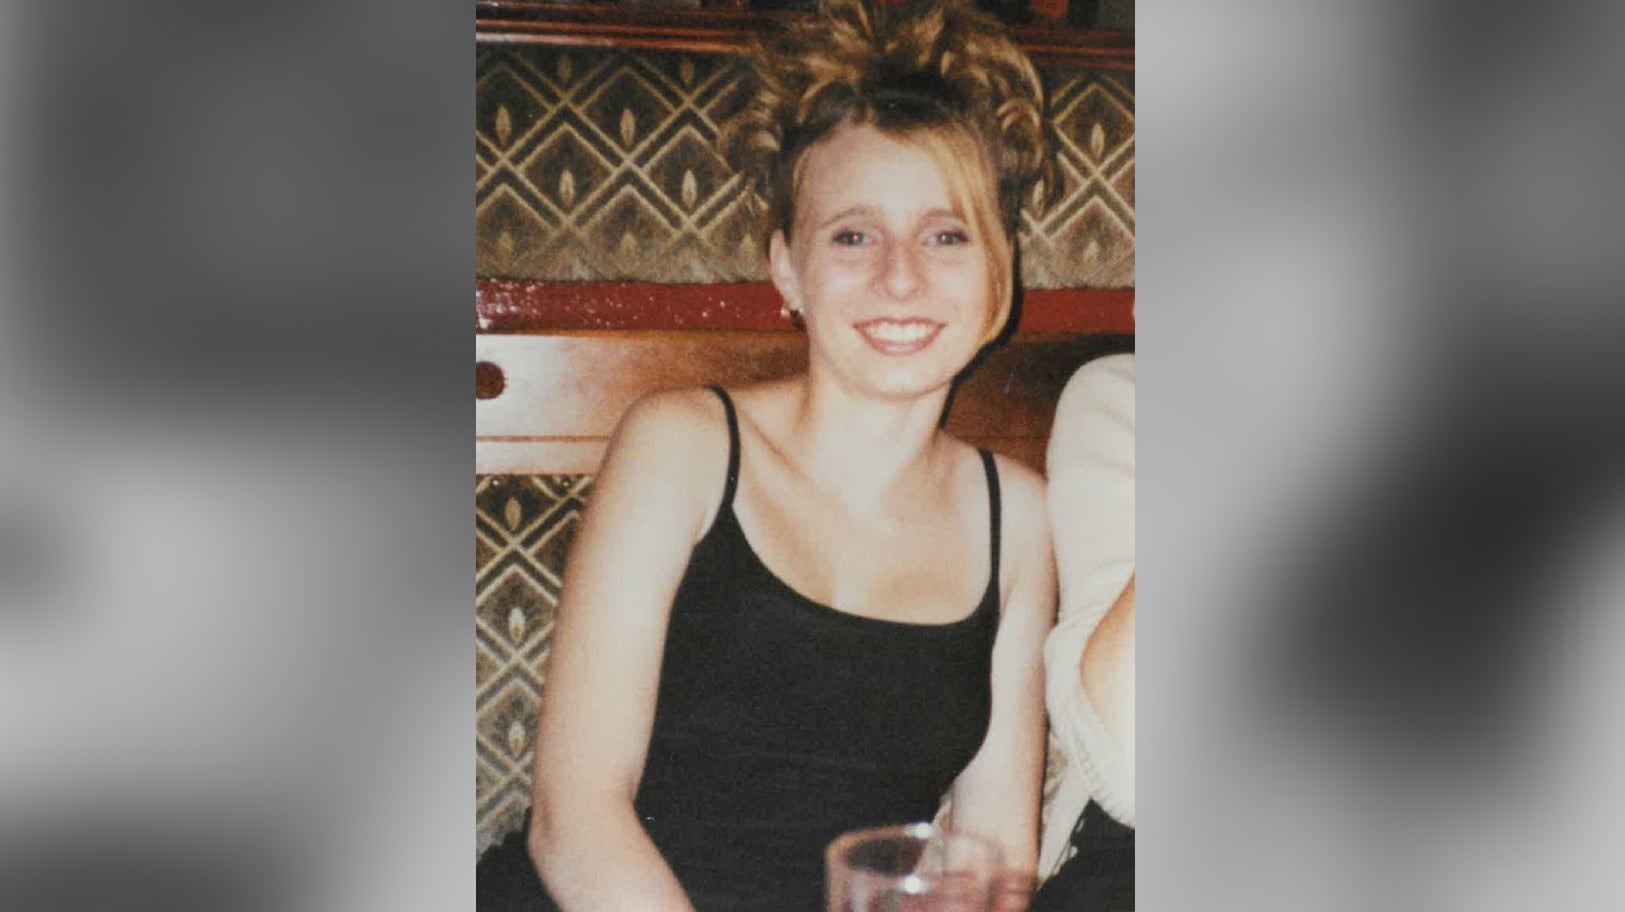 Police have arrested a man as part of the inquiry into the murder of Victoria Hall